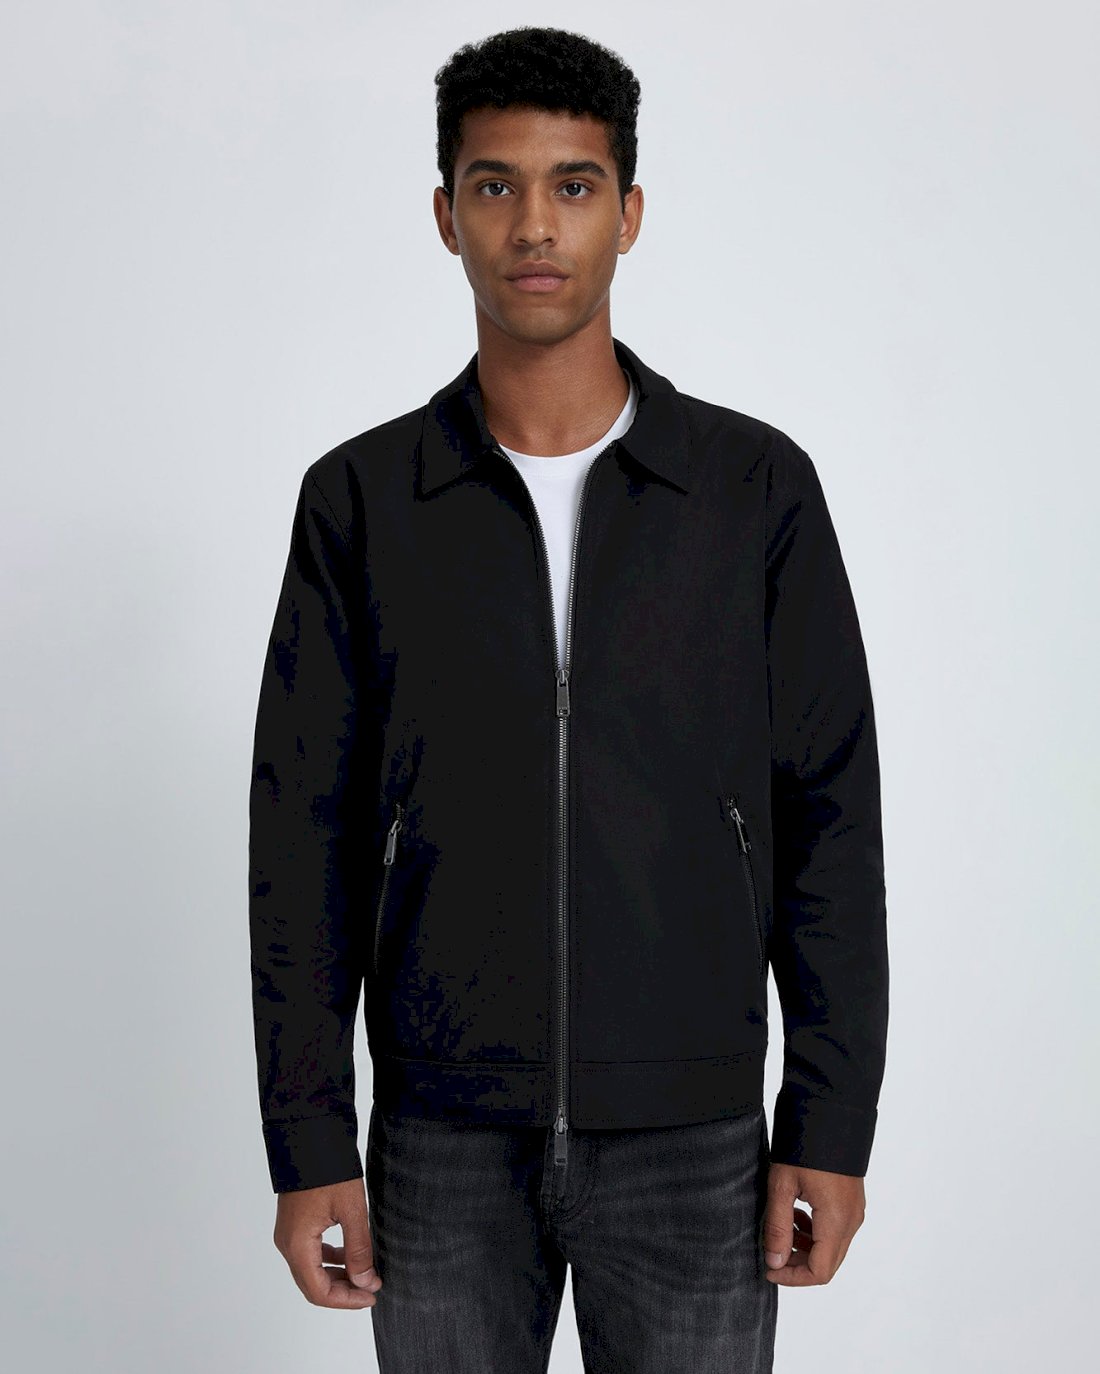 Barracuda Jacket in Black | 7 For All Mankind